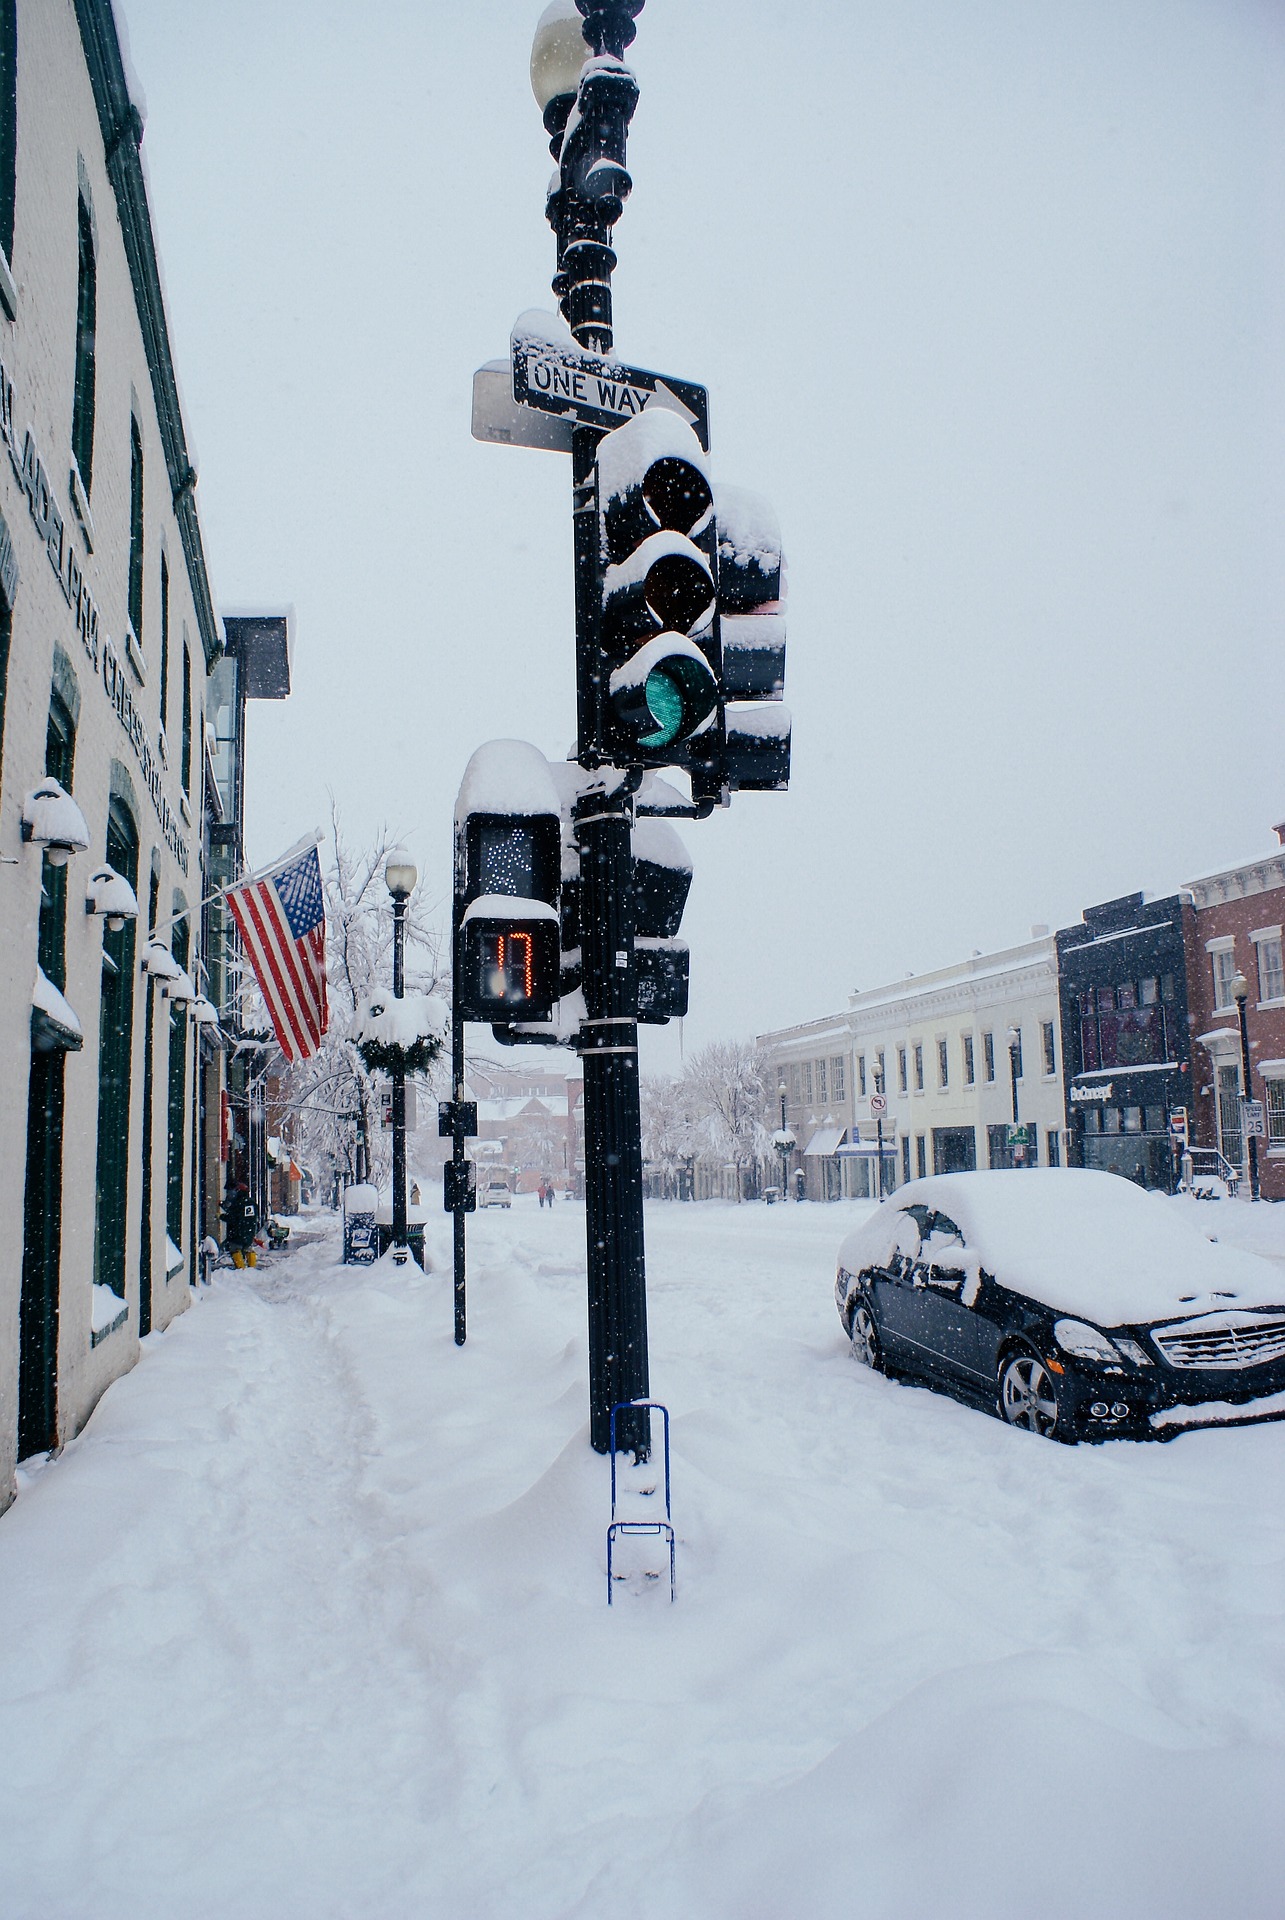 snow storm in a US town covering the ground, buildings, traffic light, and a car